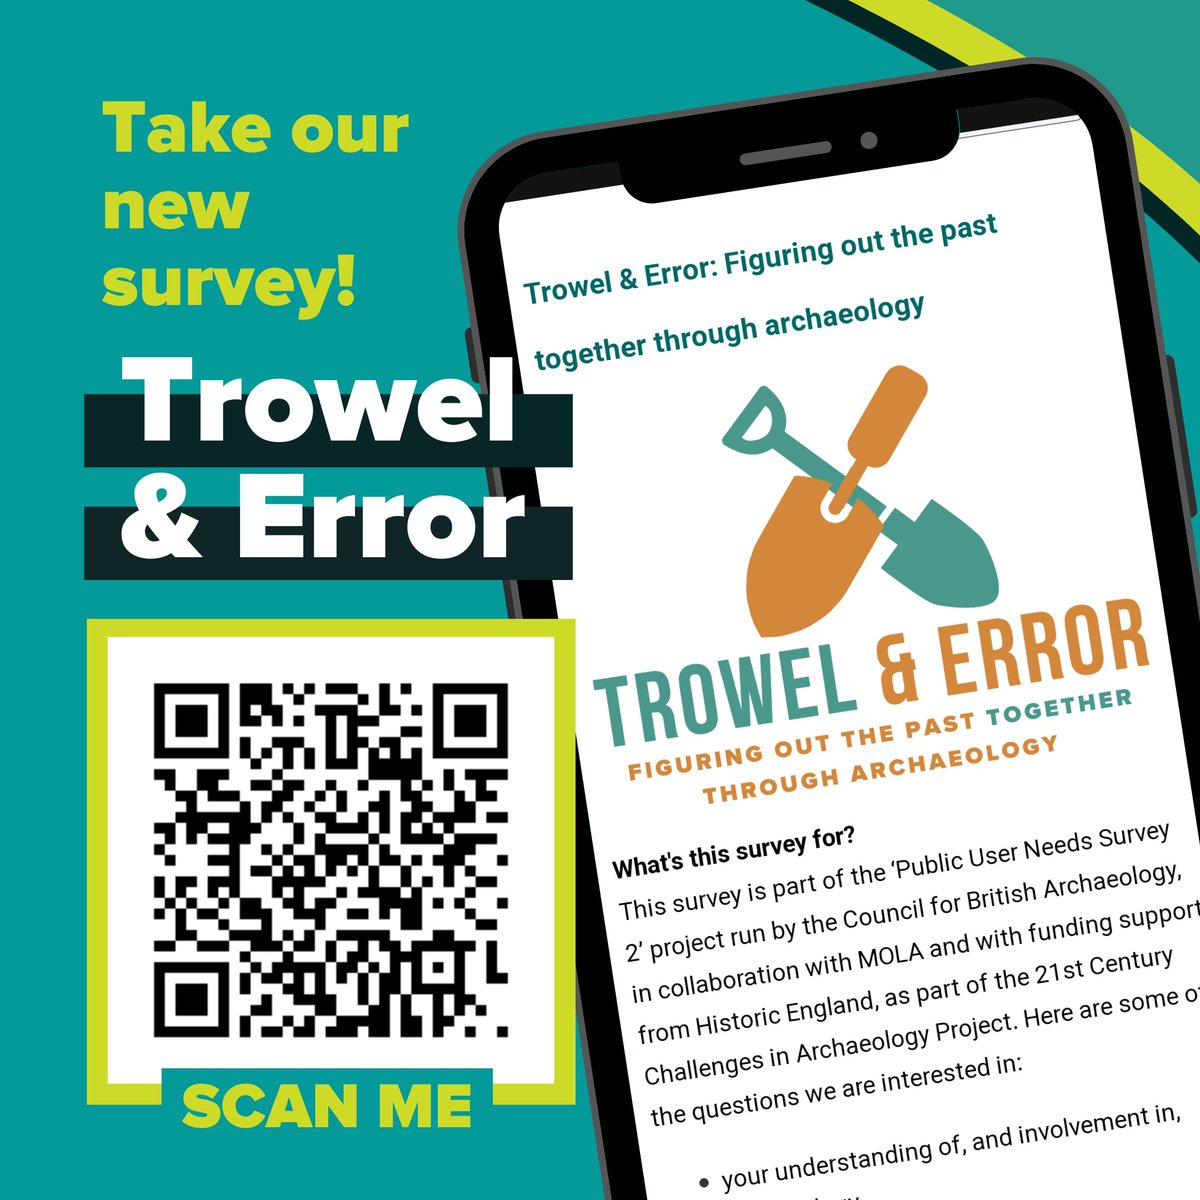 We're launching our new project survey 'Trowel and Error'. Your responses will help us and the archaeological community understand how archaeology can be more accessible. Take the survey by scanning the QR code or following this link 👉york.qualtrics.com/jfe/form/SV_3T… #Archaeology